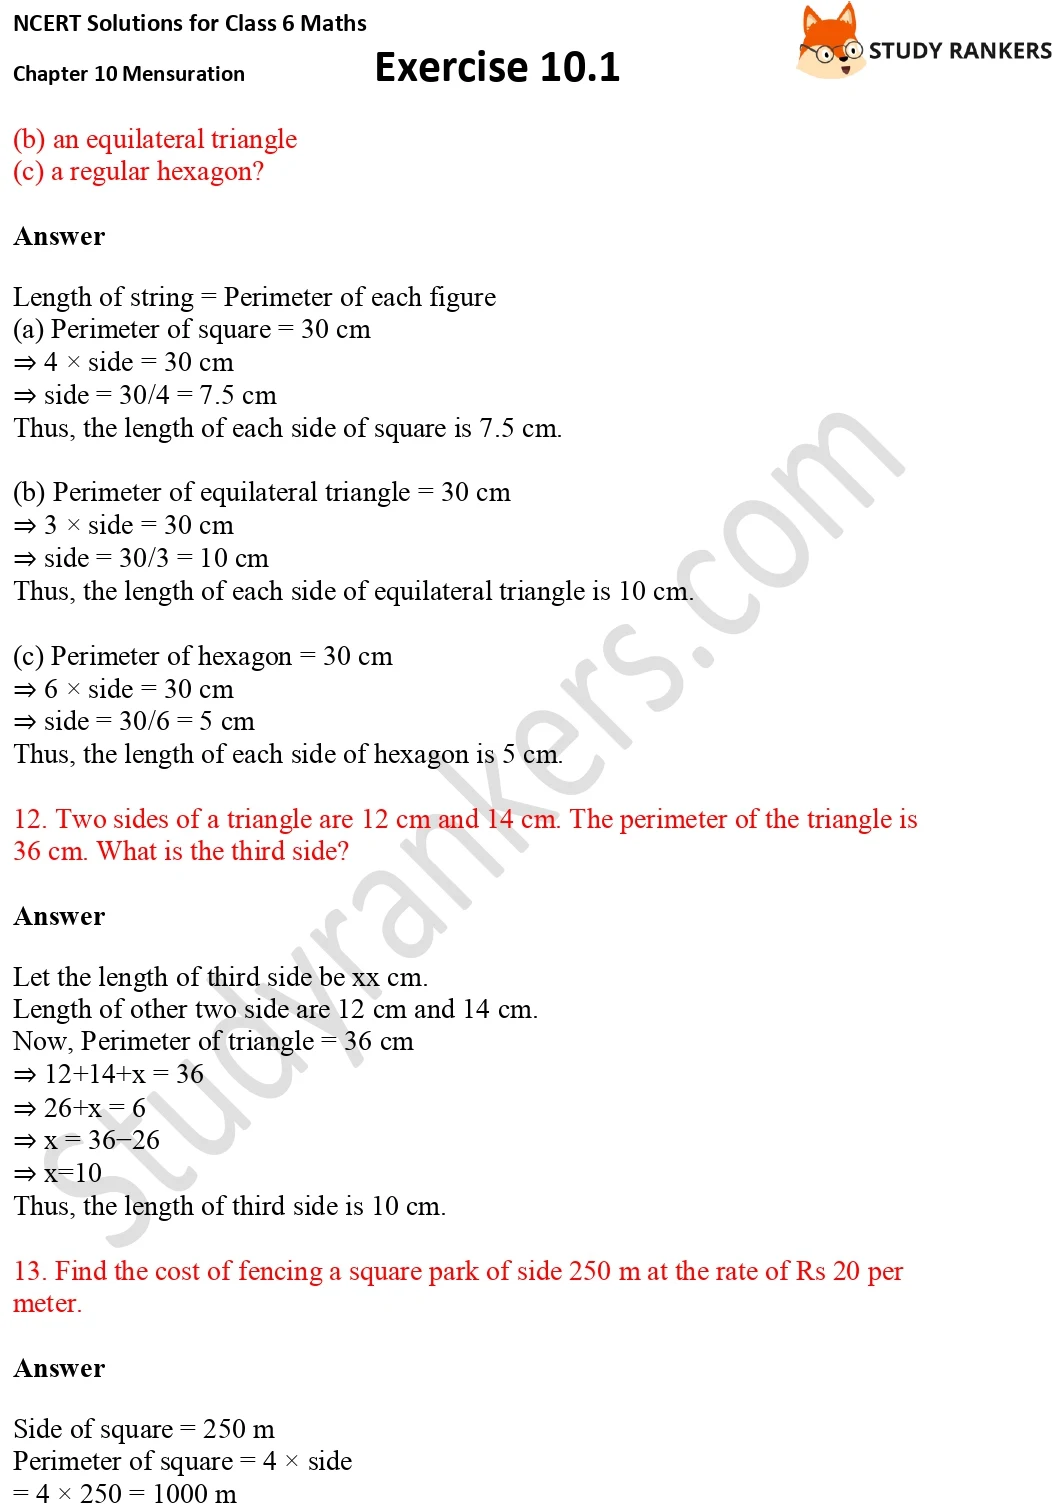 NCERT Solutions for Class 6 Maths Chapter 10 Mensuration Exercise 10.1 Part 5